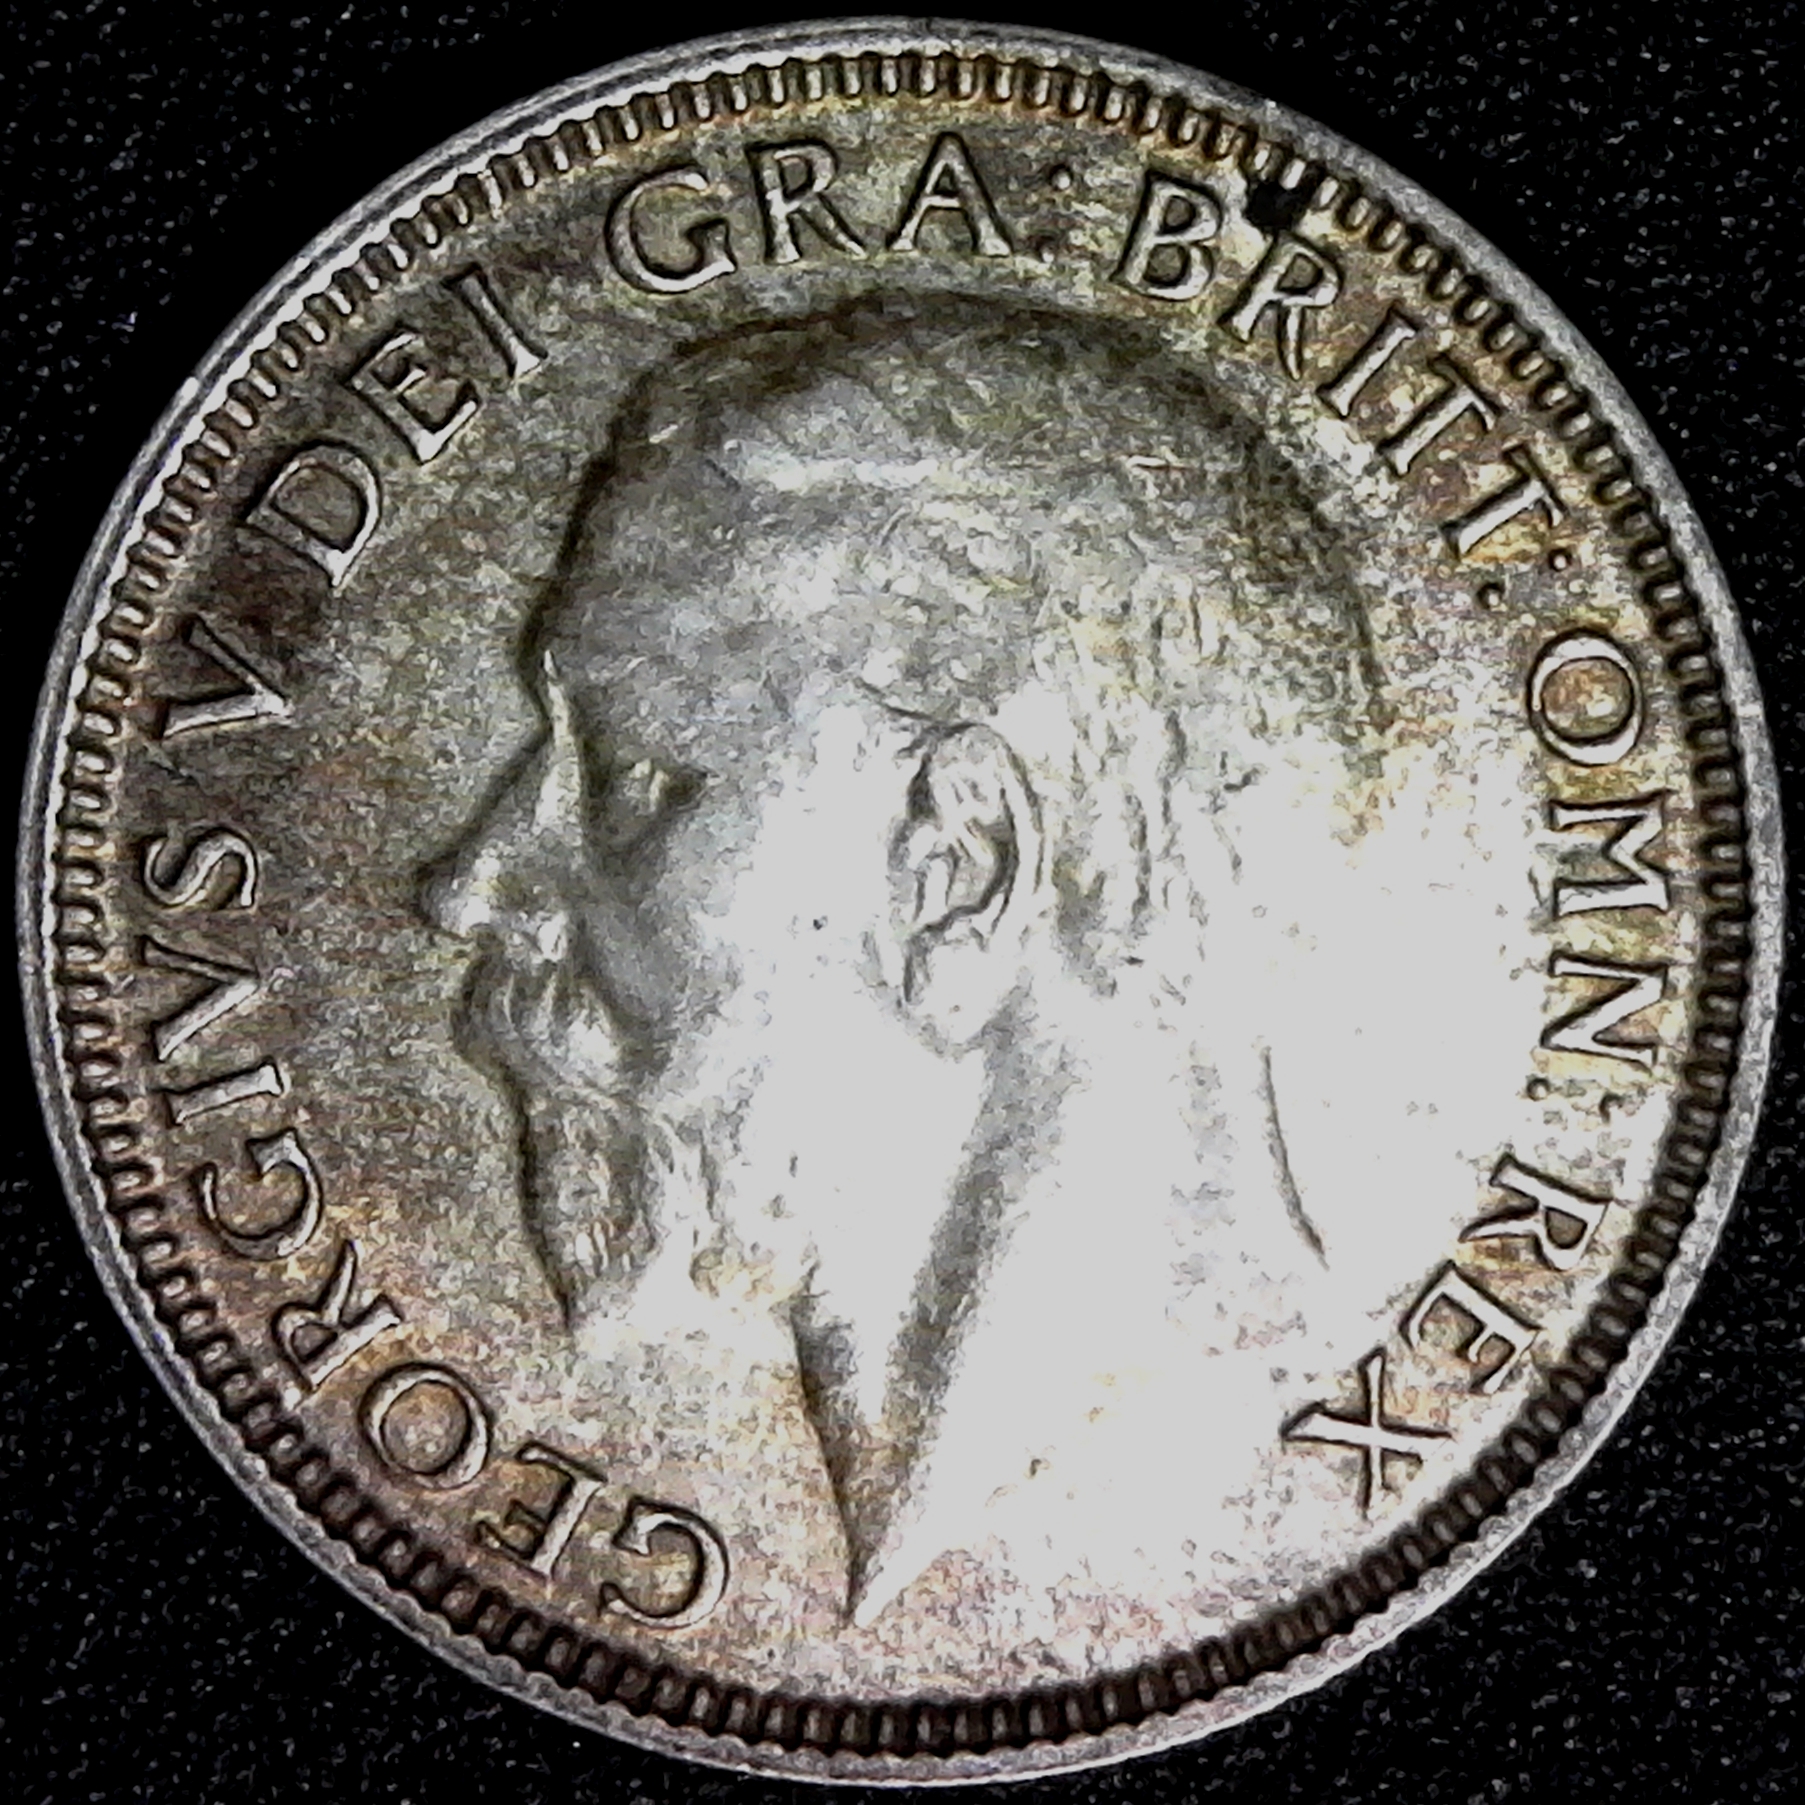 Great Britain Shilling 1928 obv A.jpg